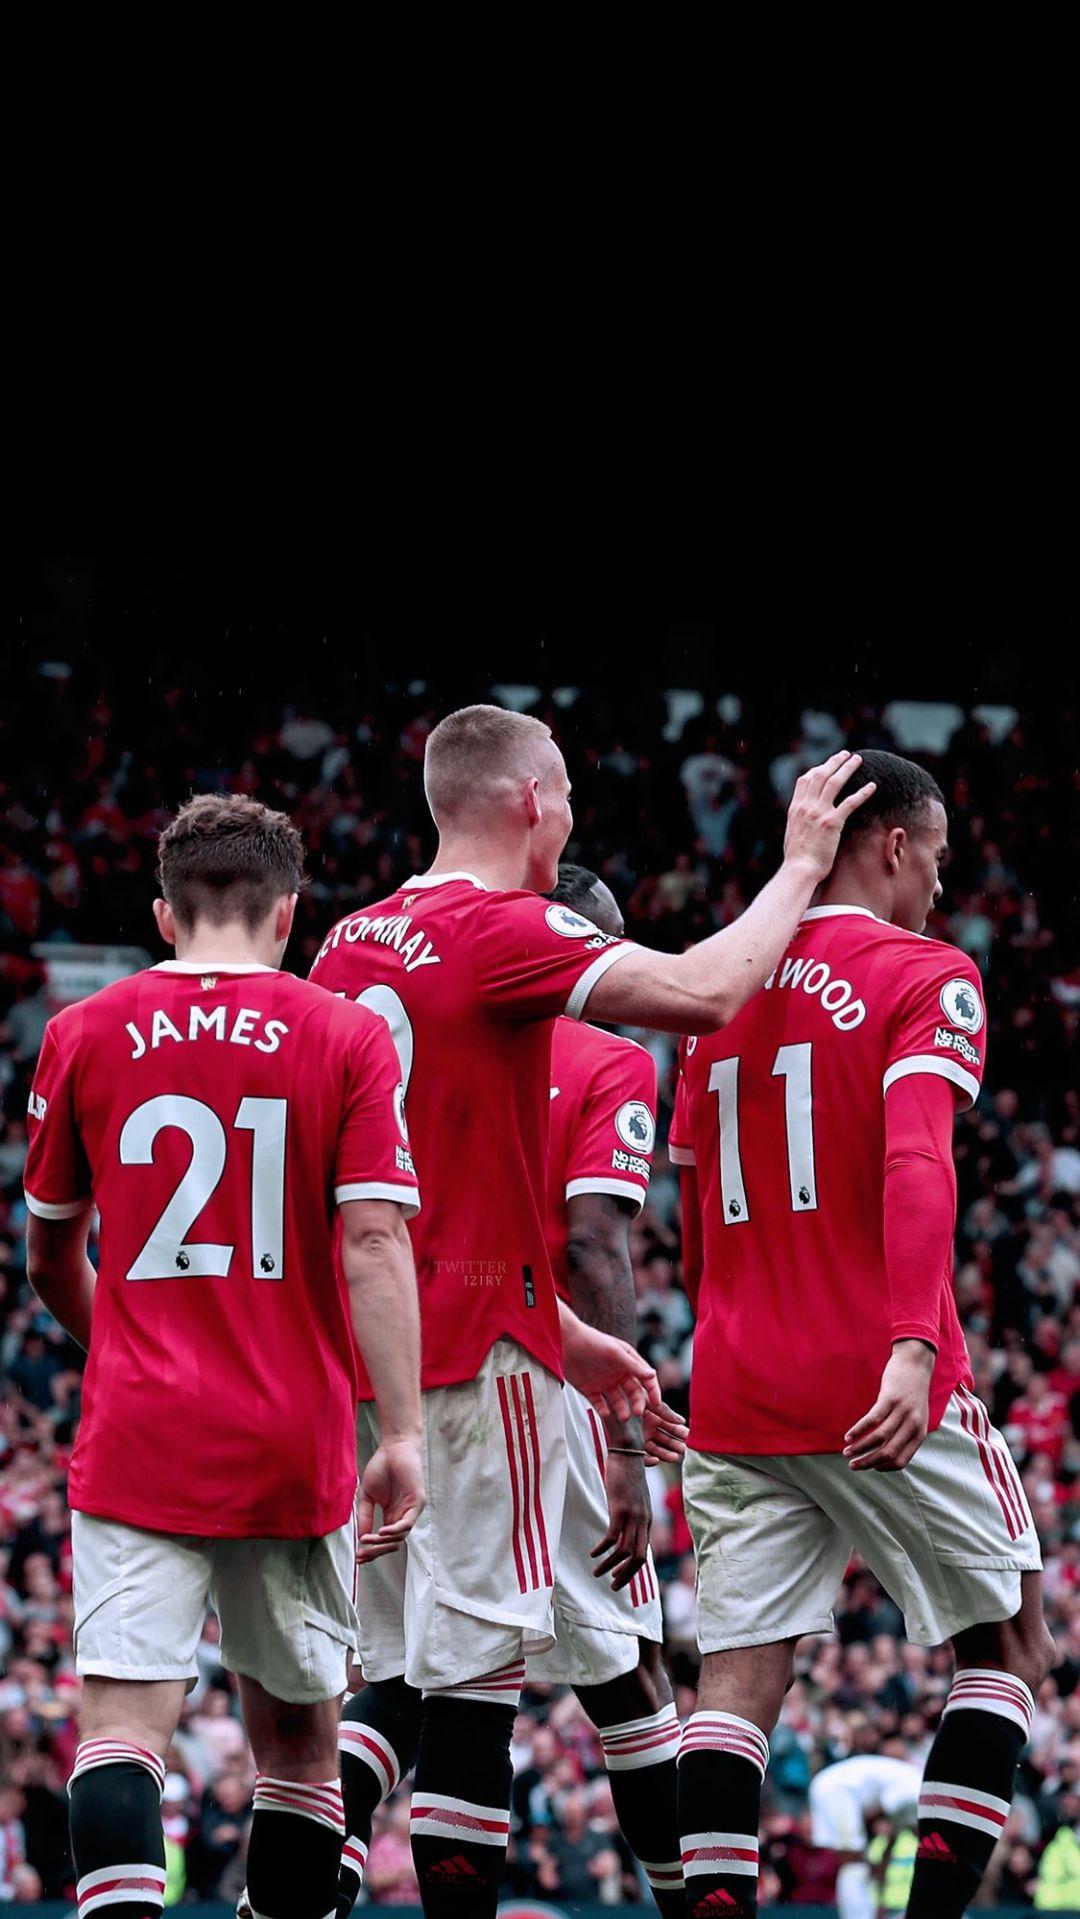 Manchester United Wallpapers   Top 35 Best Manchester United